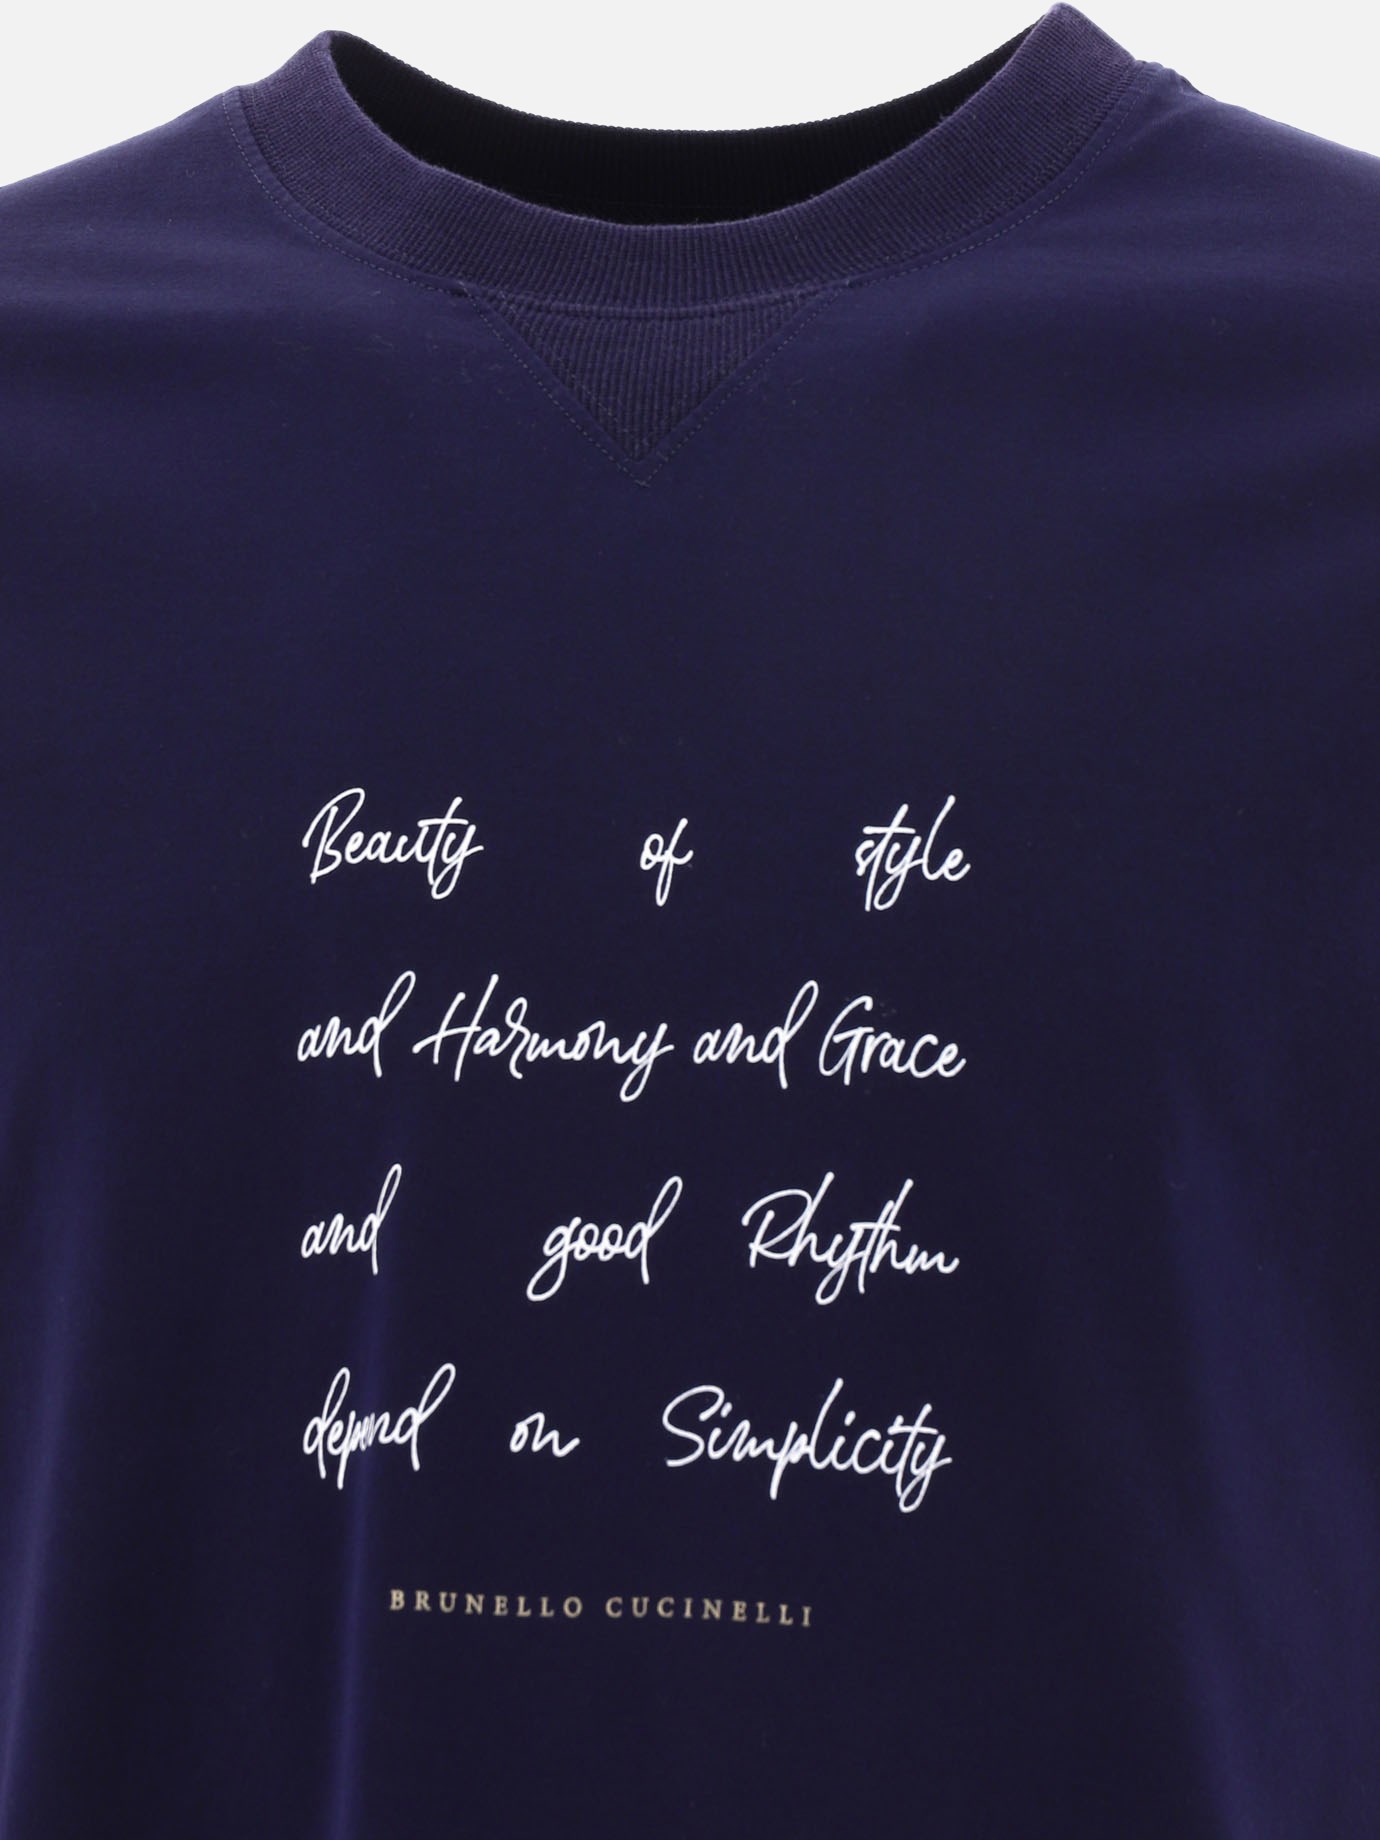  Beauty of Style  t-shirt by Brunello Cucinelli